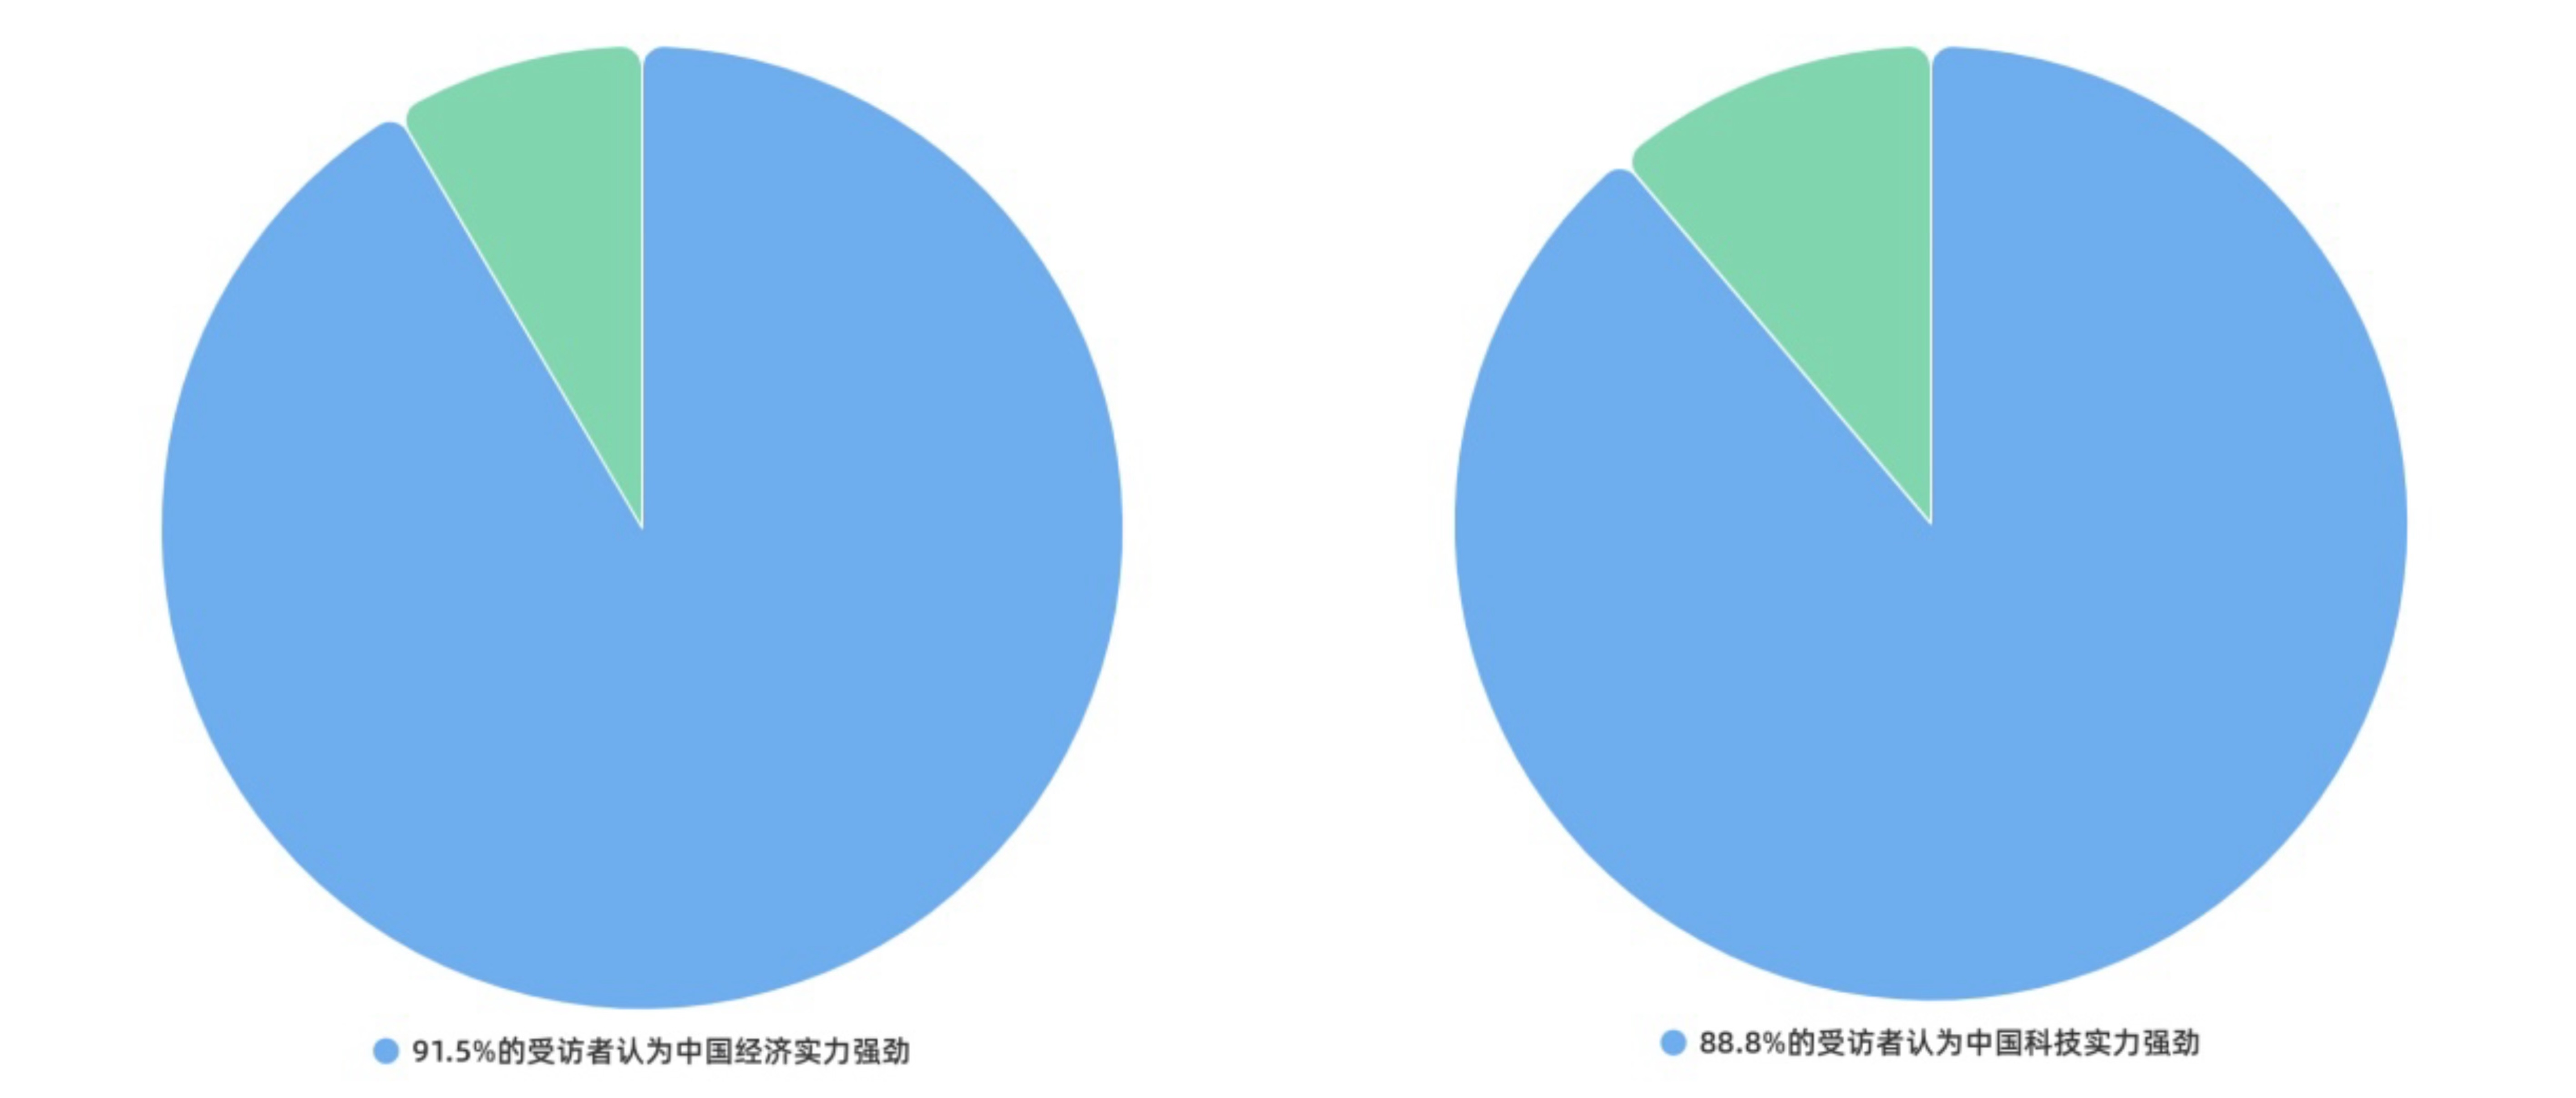 The chart on the left shows 91.5 percent of respondents to a new poll  appreciate China's strong economic strength. The chart on the right shows 88.8 percent of respondents believe that China is strong in science and technology. /CGTN